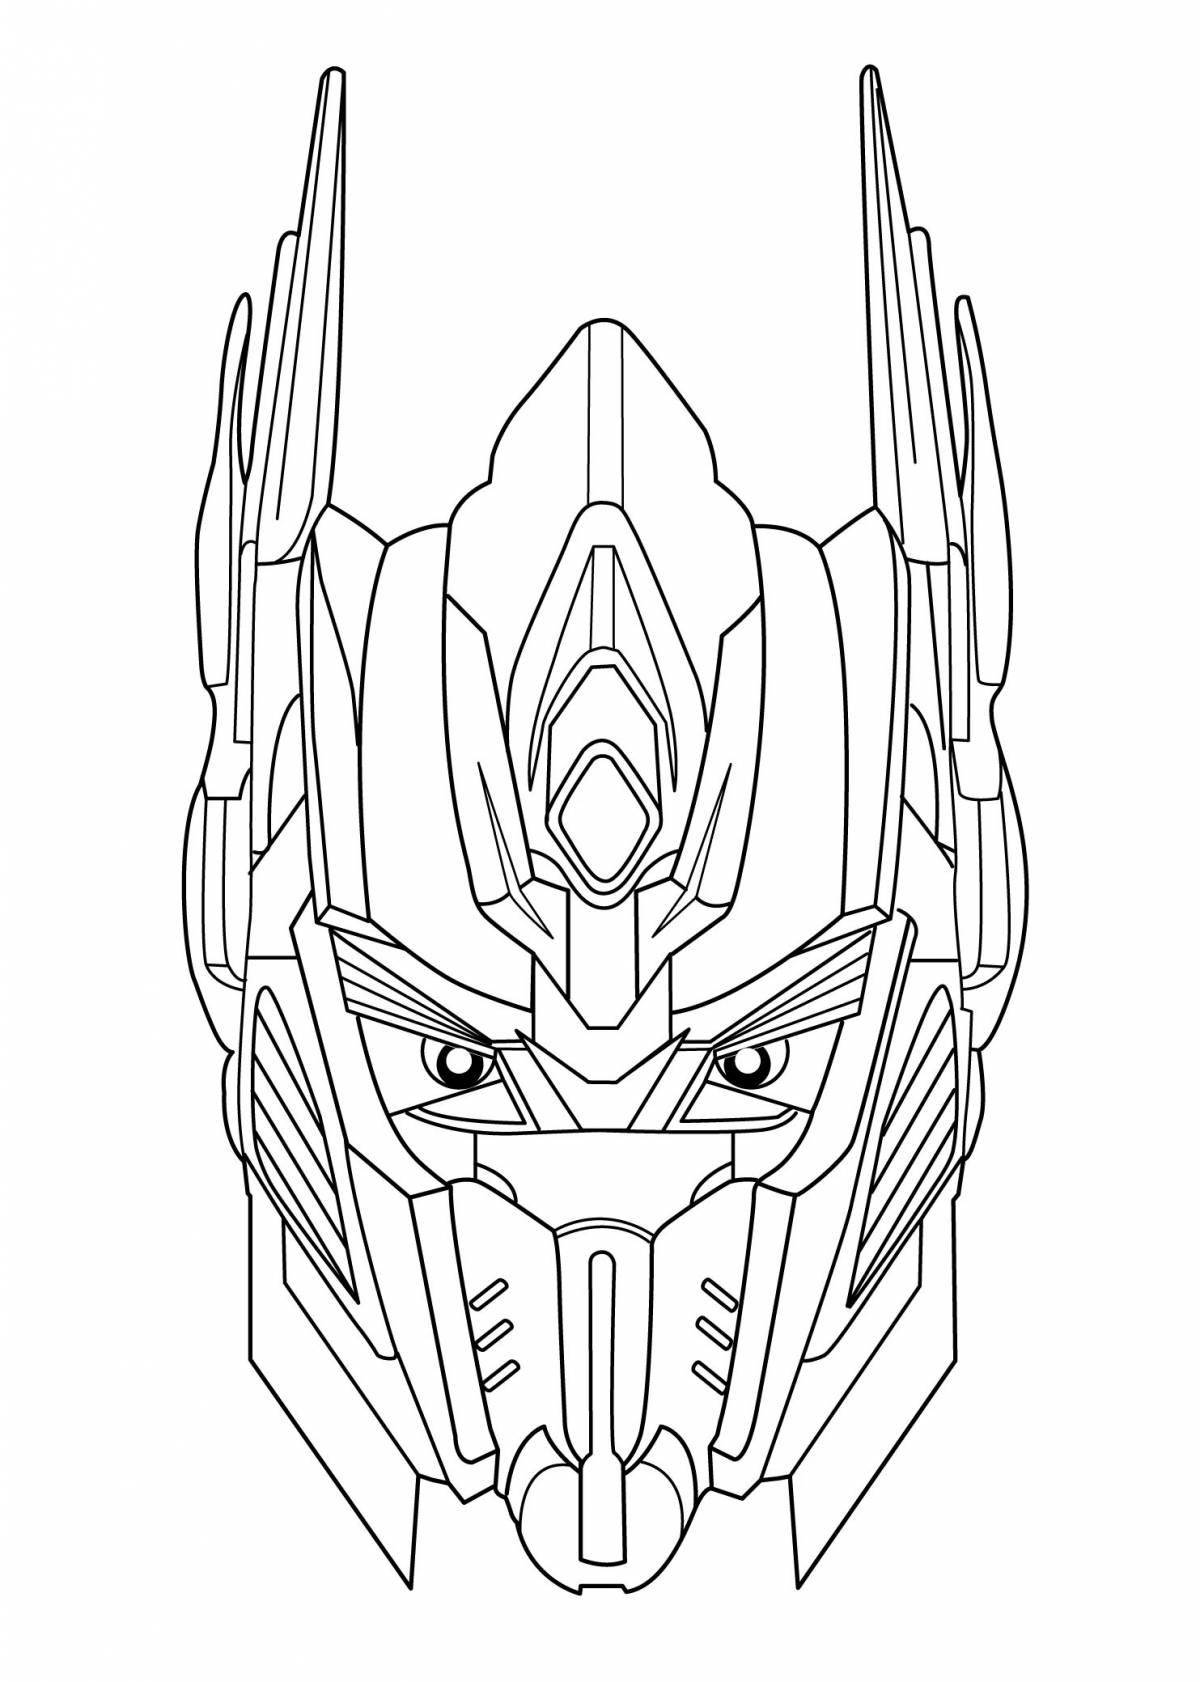 Colorful embroidered transformers prime coloring page